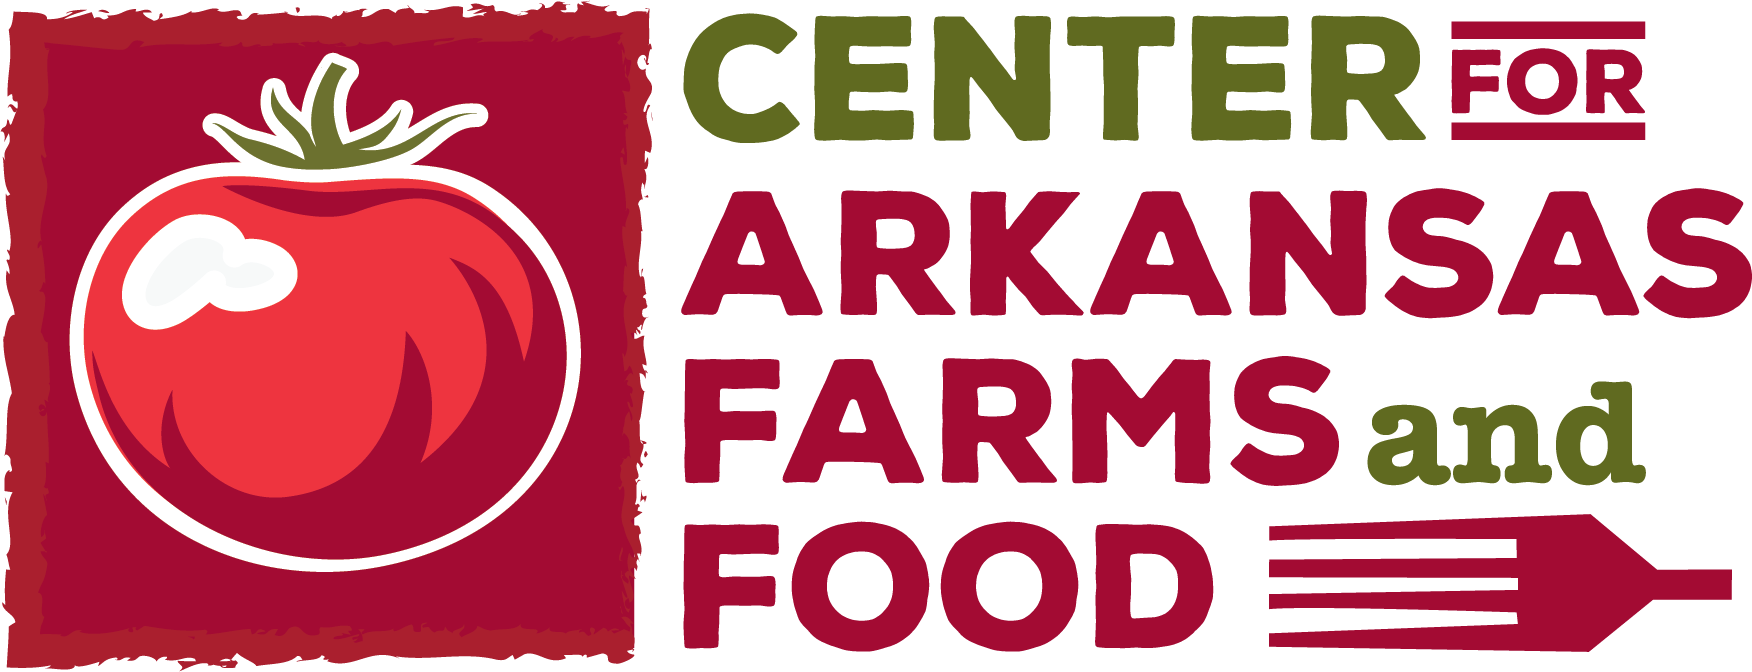 Center for Arkansas Farms and Food